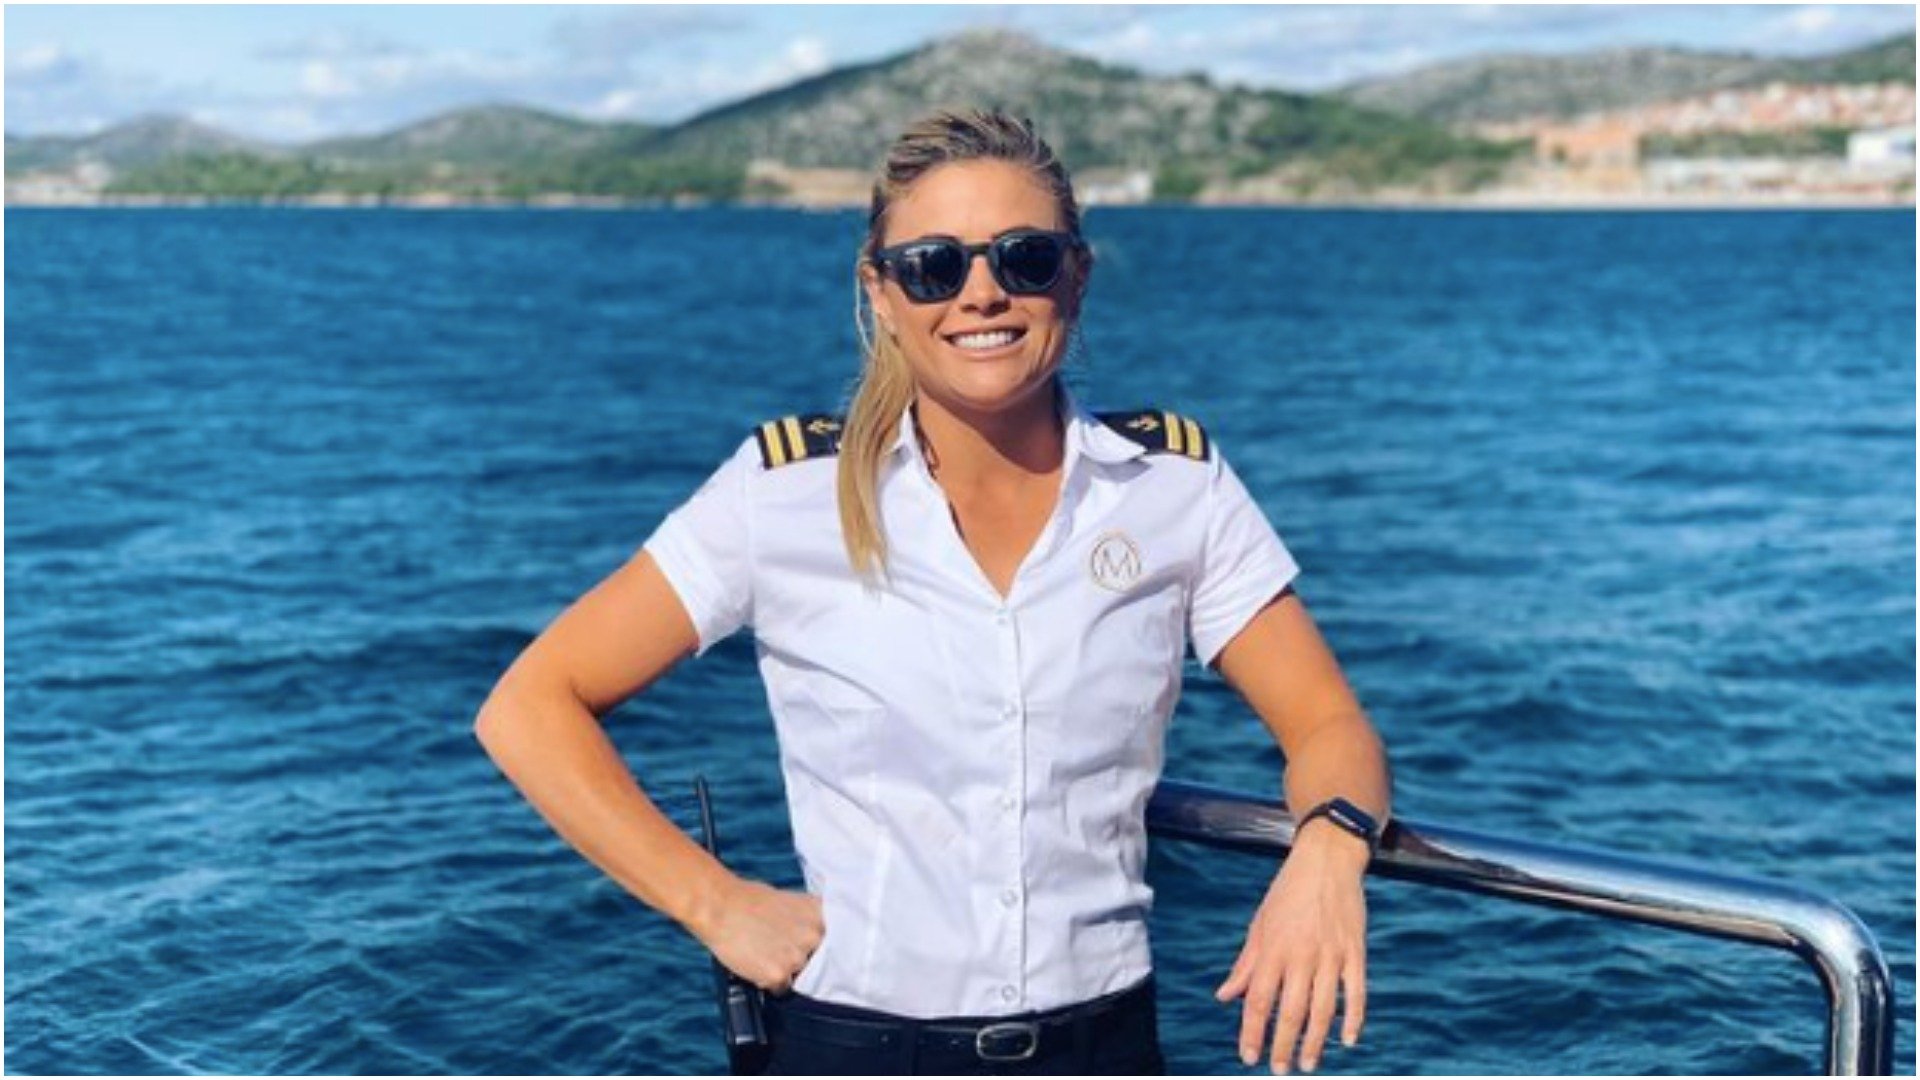 Malia White From ‘Below Deck Med’ Clears up a Major Misconception About Why She’s Not on Season 7 [Exclusive]